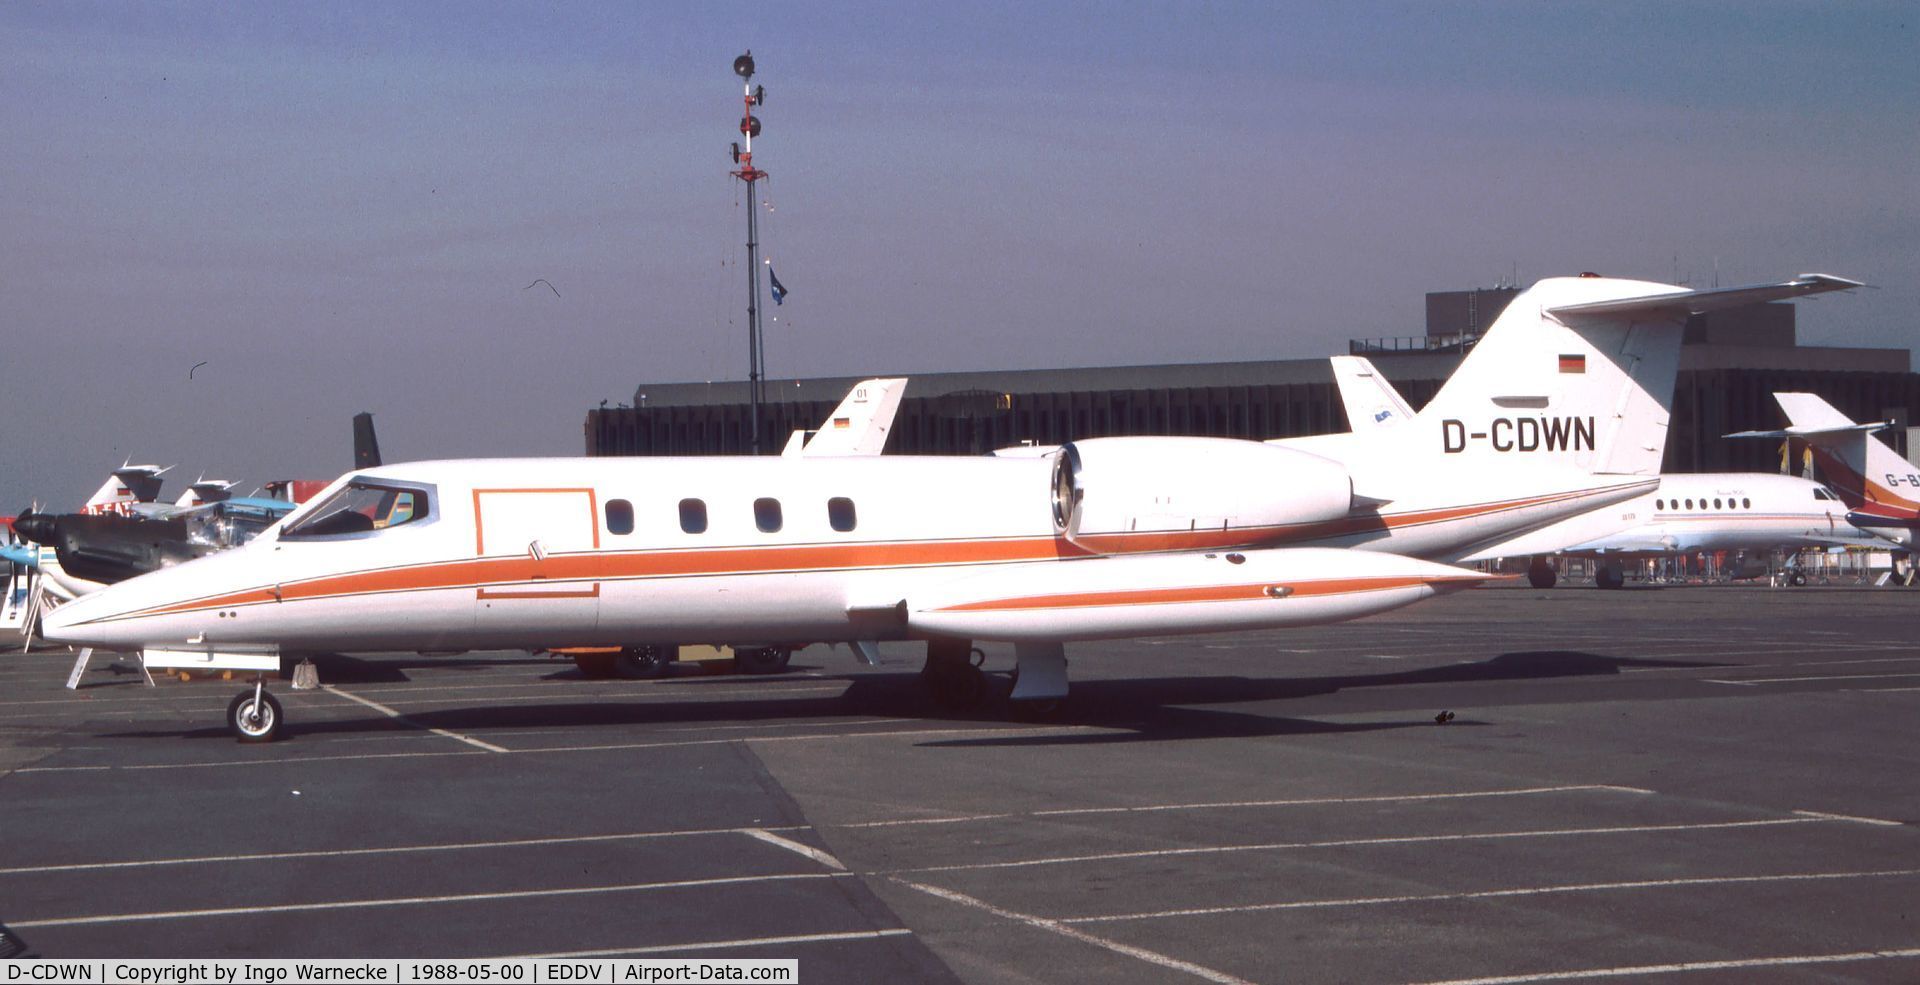 D-CDWN, 1978 Gates Learjet 35A C/N 35A-175, Gates Learjet 35A at the ILA 1988, Hannover